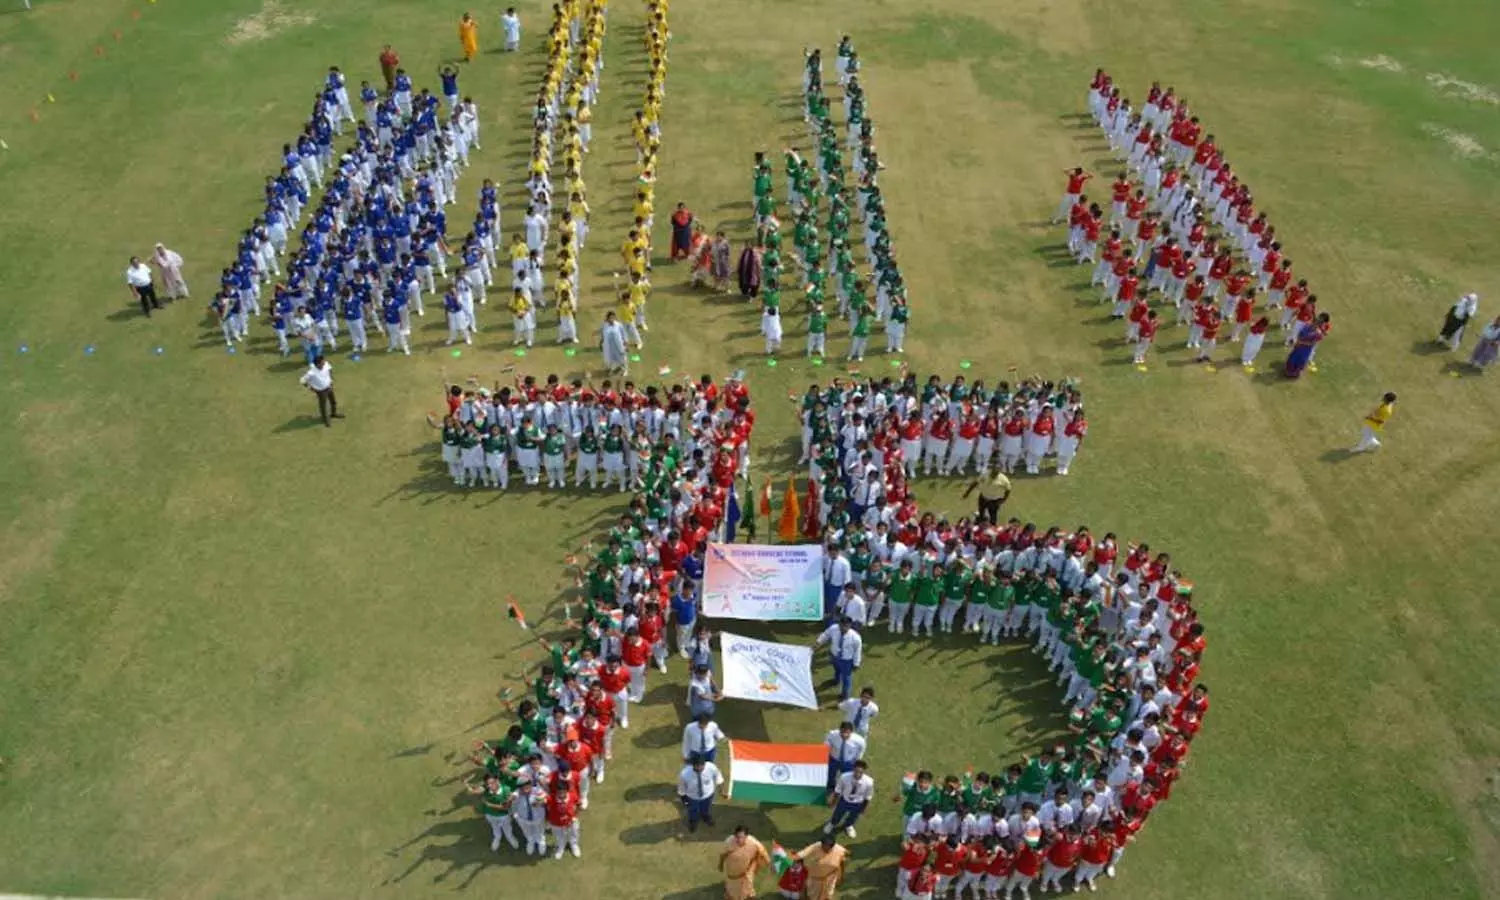 School children also took out the tricolor yatra in Prayagraj, the spirit of the Amrit festival is visible among the citizens